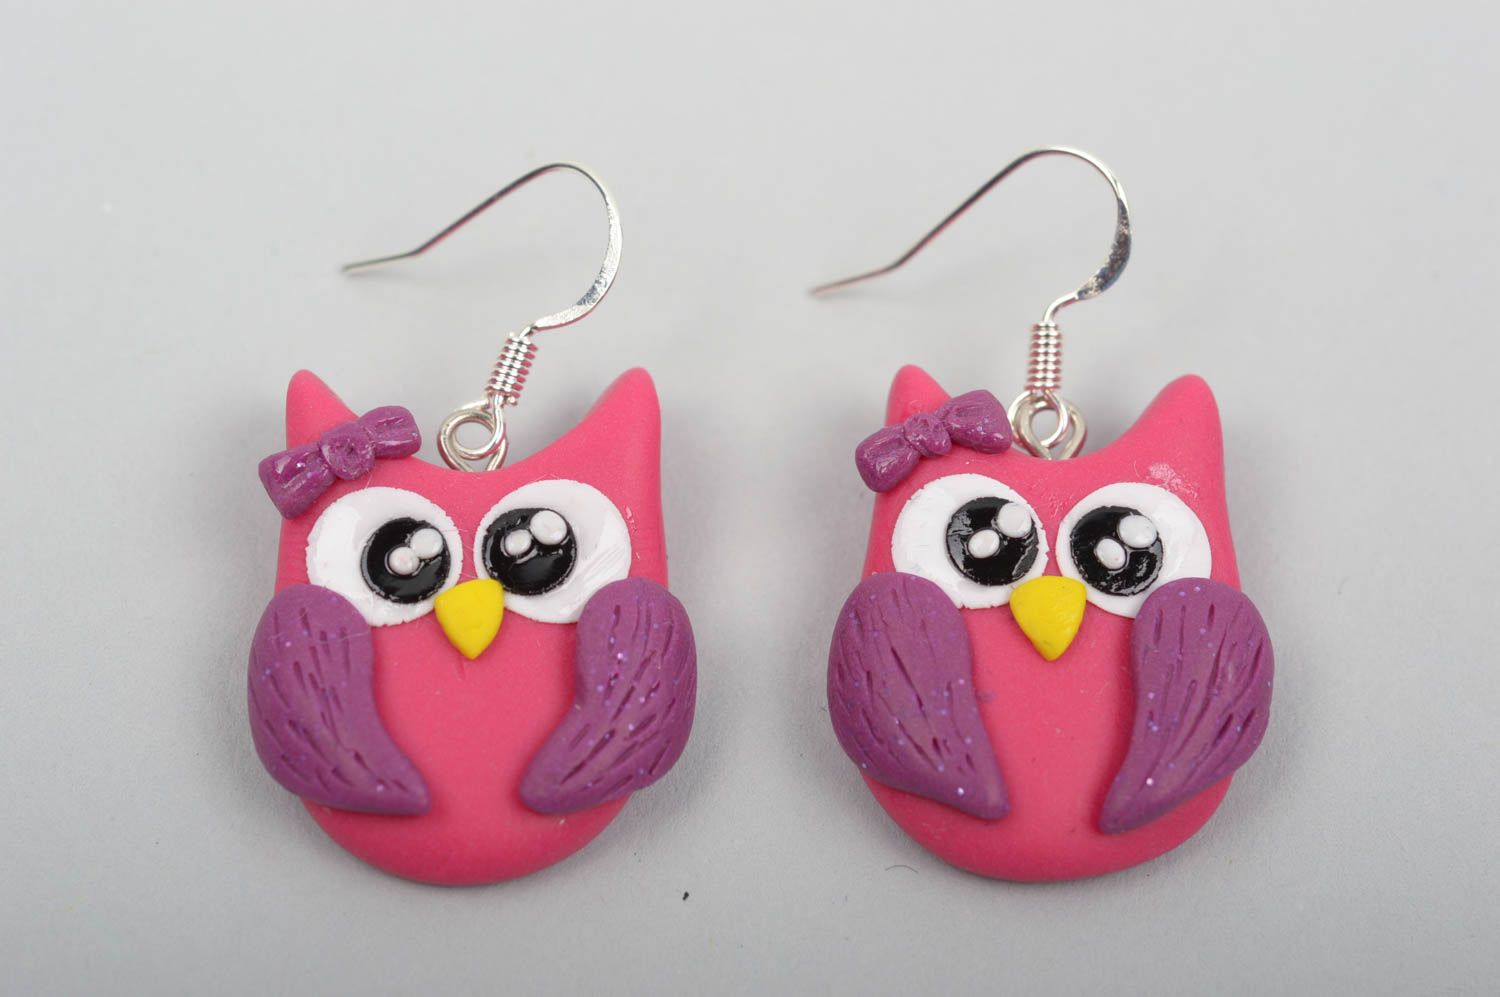 Handmade earrings polymer clay fashion jewelry kids accessories gifts for kids photo 1